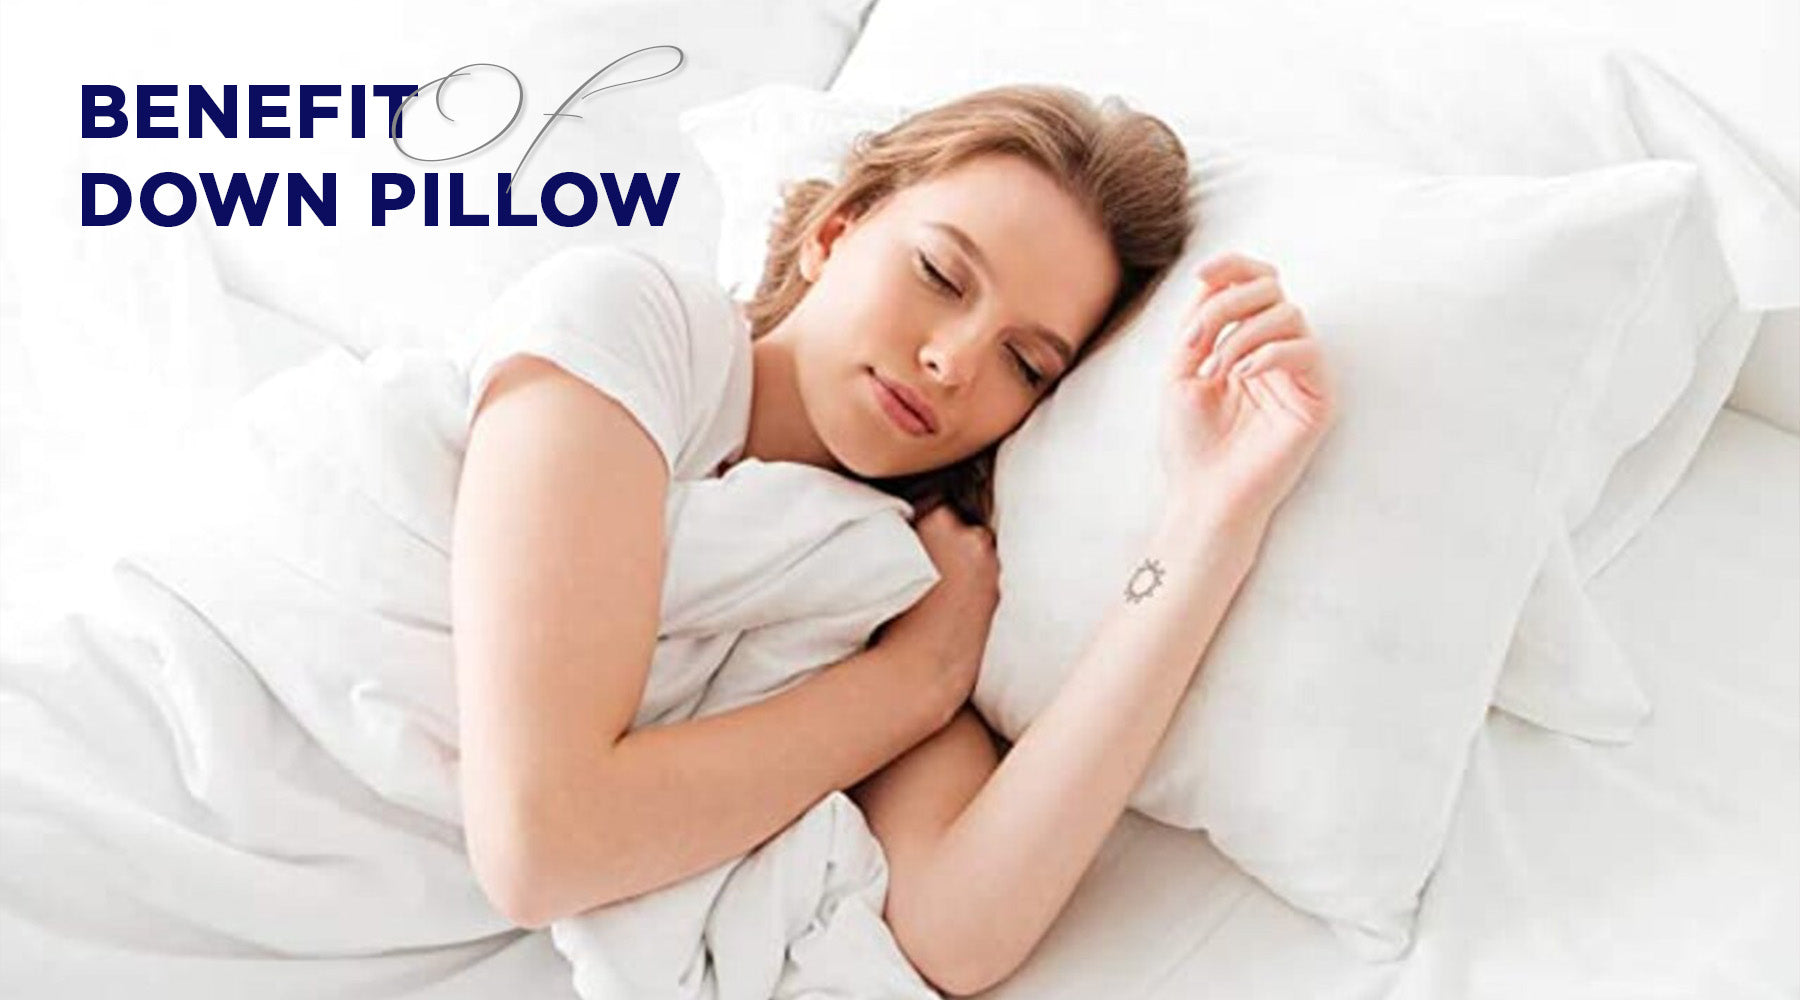 Benefits of Down Pillows: Comfort, Durability, and Health